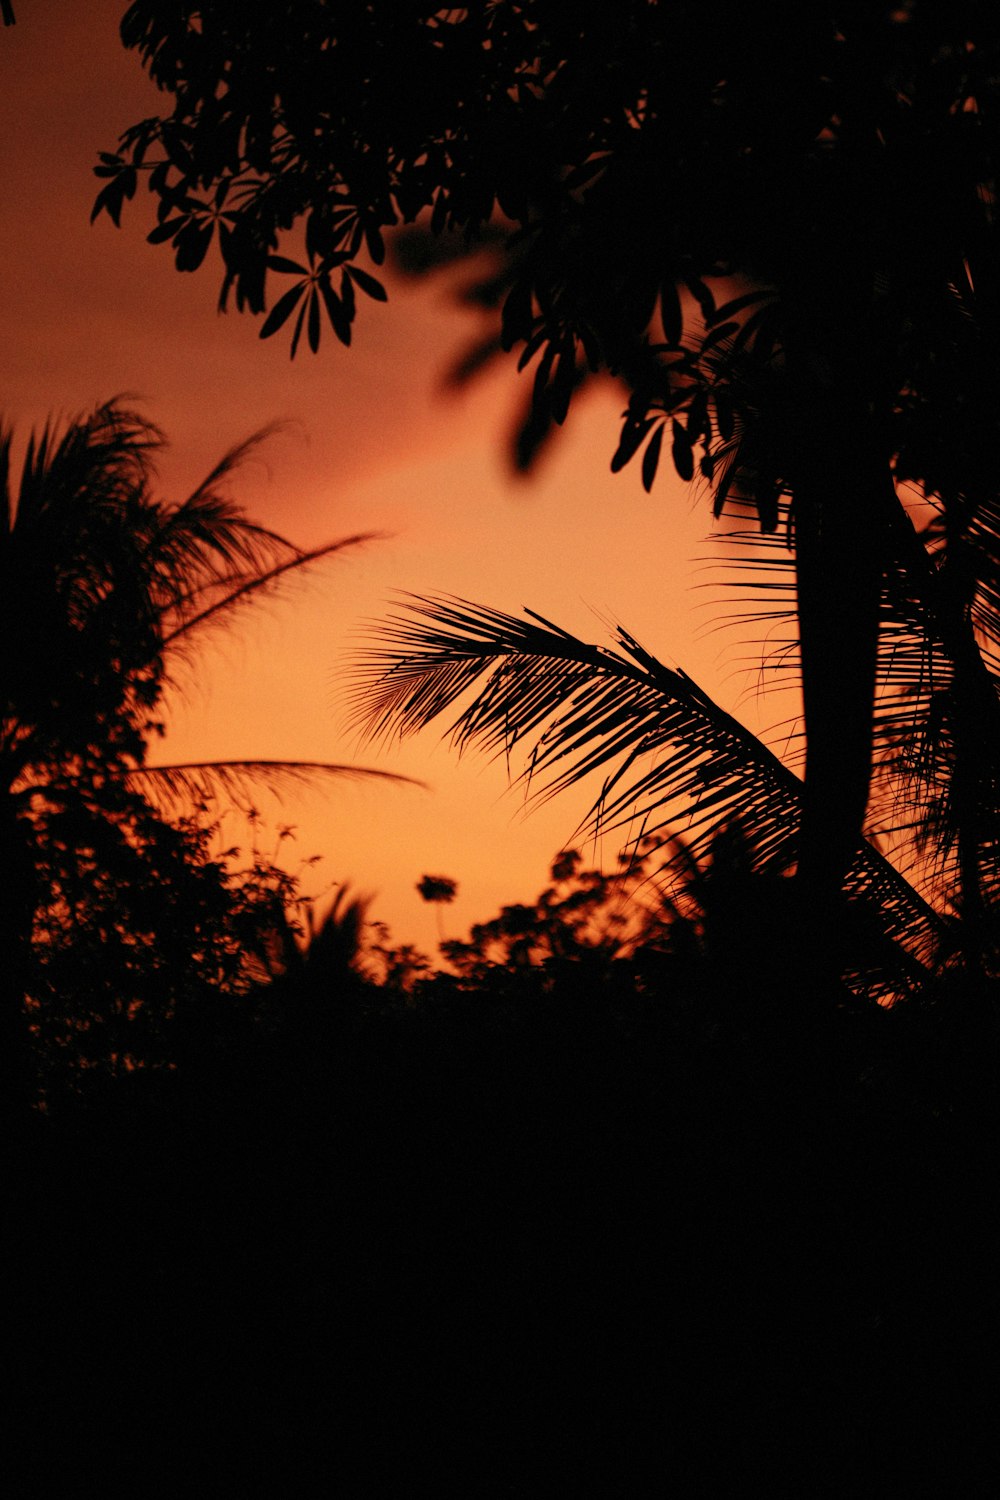 the silhouette of a palm tree against a sunset